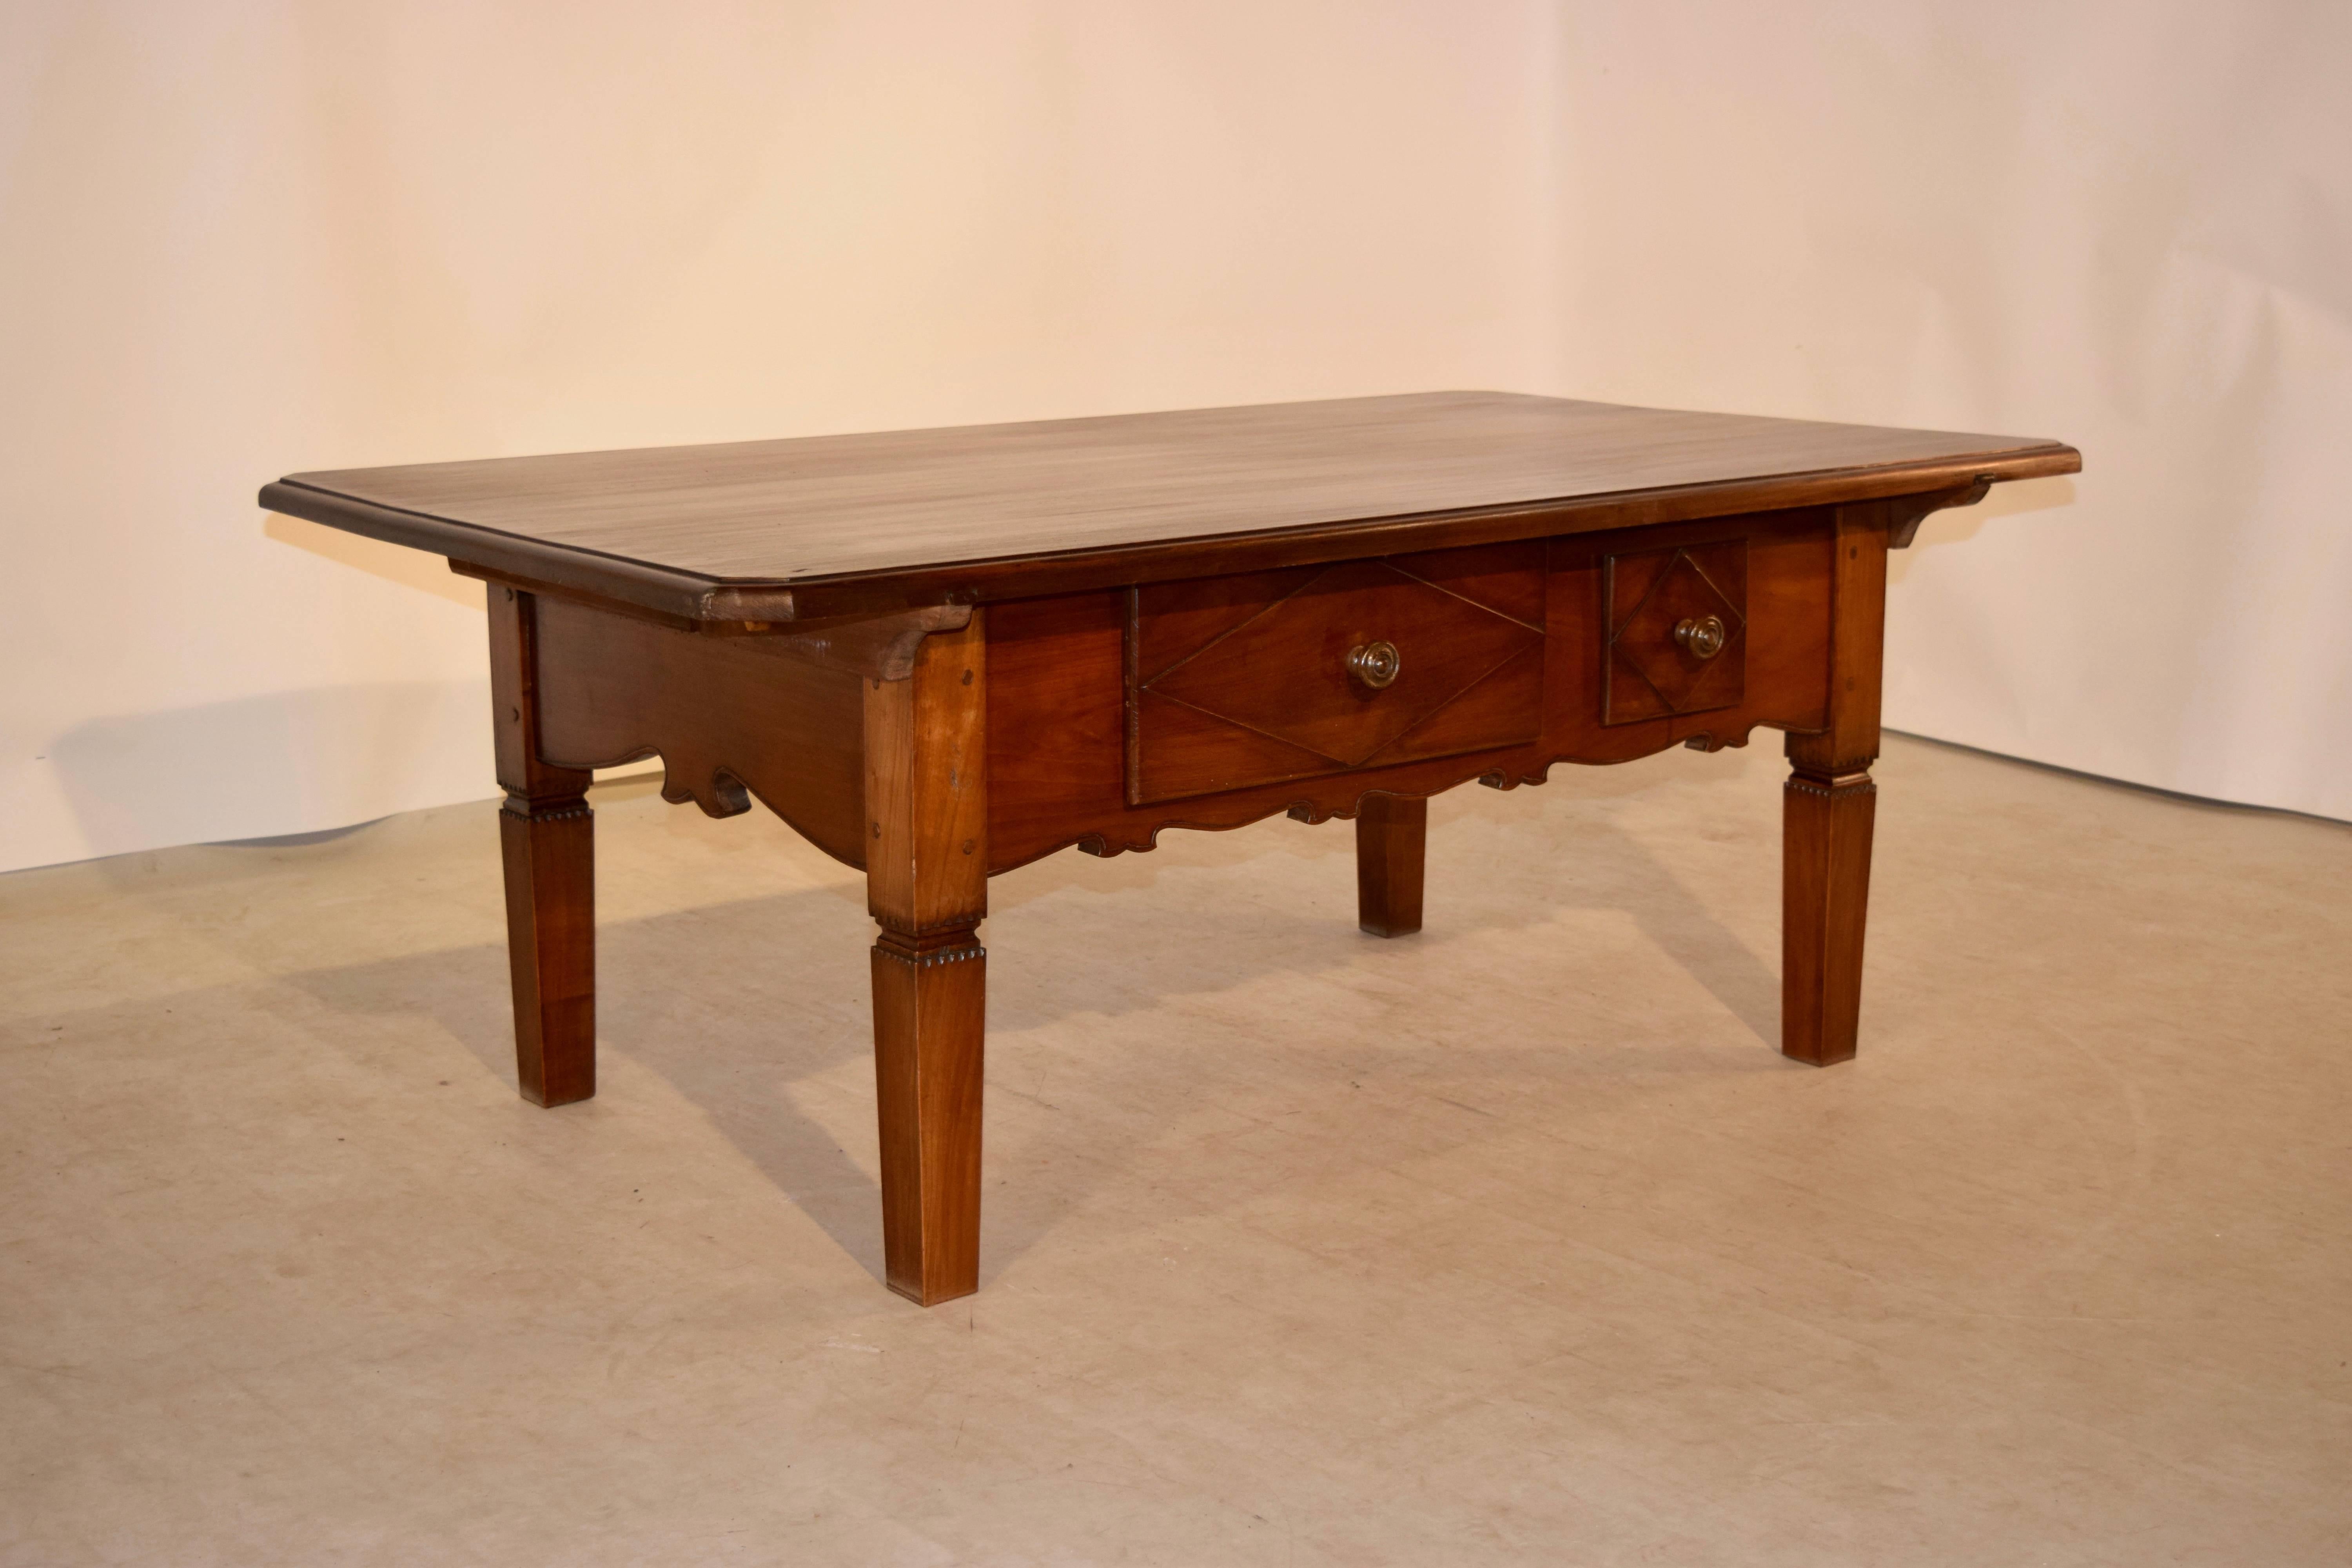 19th century Swiss coffee table made from cherry. The top is made from three boards with wonderful graining and a beveled edge with chamfered corners. The apron is scalloped and has two drawers in the front with geometric panel drawer fronts. The